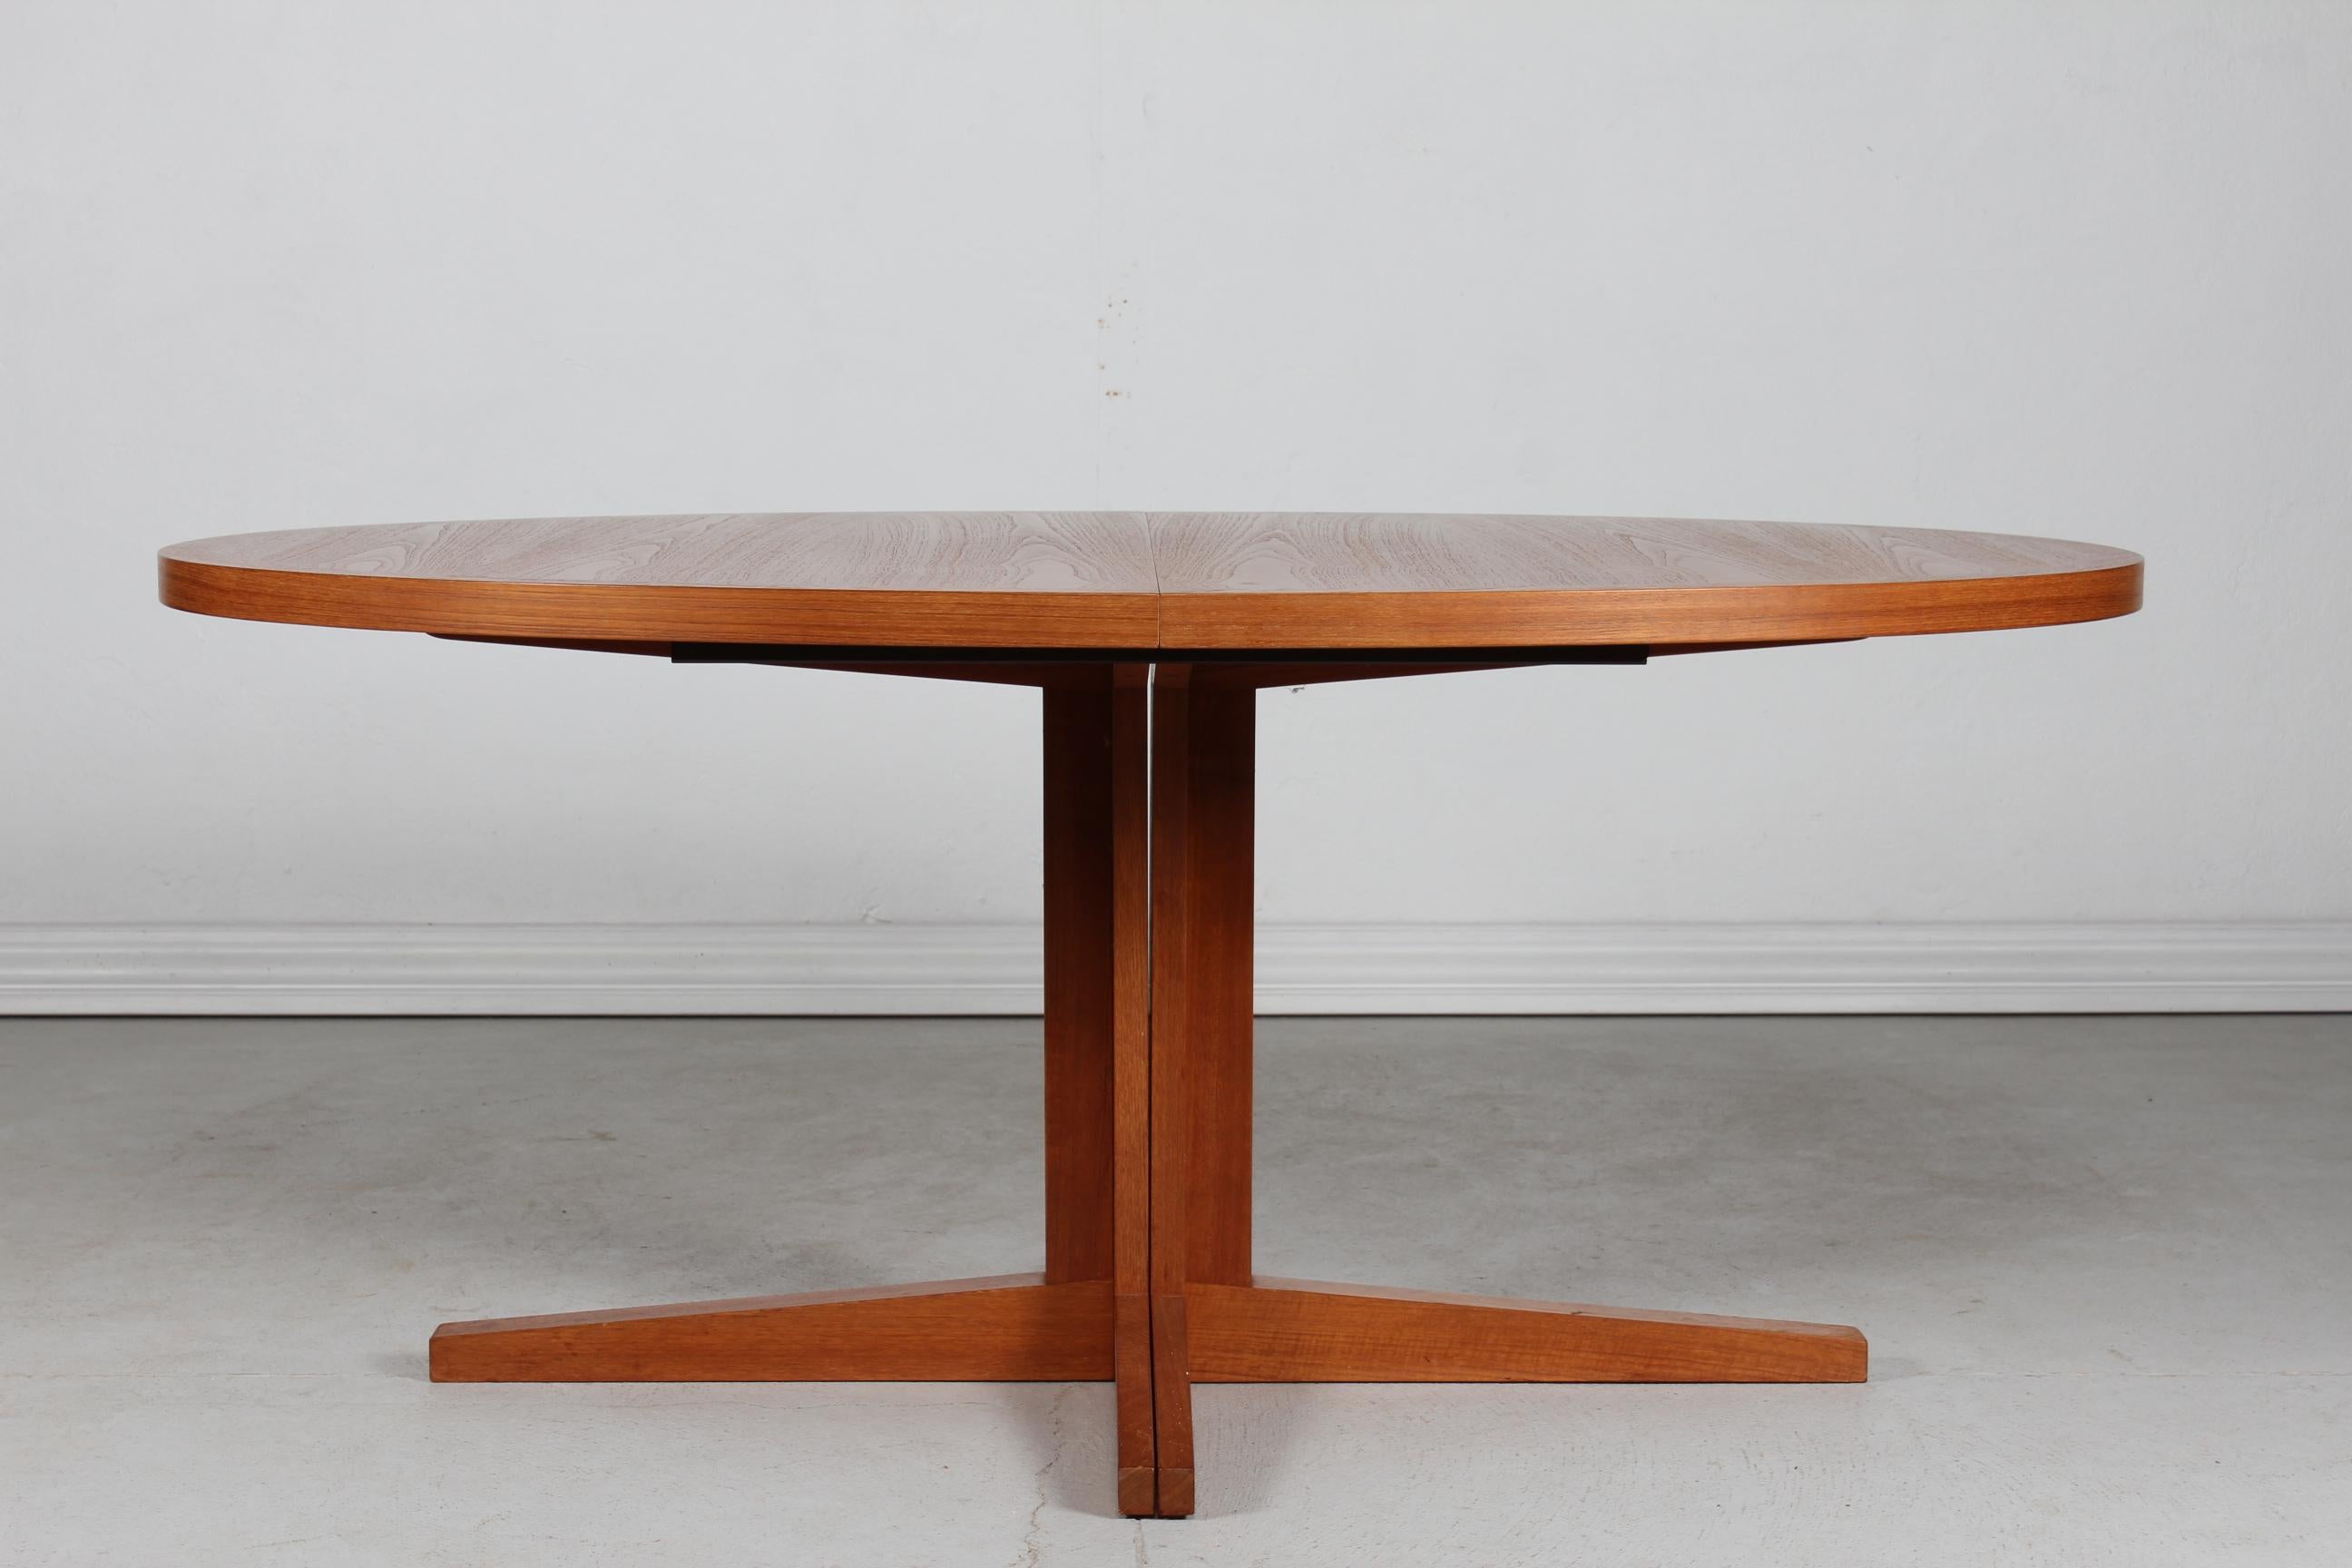 Oval pillar extendable dining table of teak with two leaves.
Made by the Danish cabinetmaker Dyrlund/Skovby Møbler in the 1970s.

Length: 163 cm + 2 x 50 cm total 263 cm
Width: 114 cm
Height: 71 cm

Very nice vintage condition without any damage or